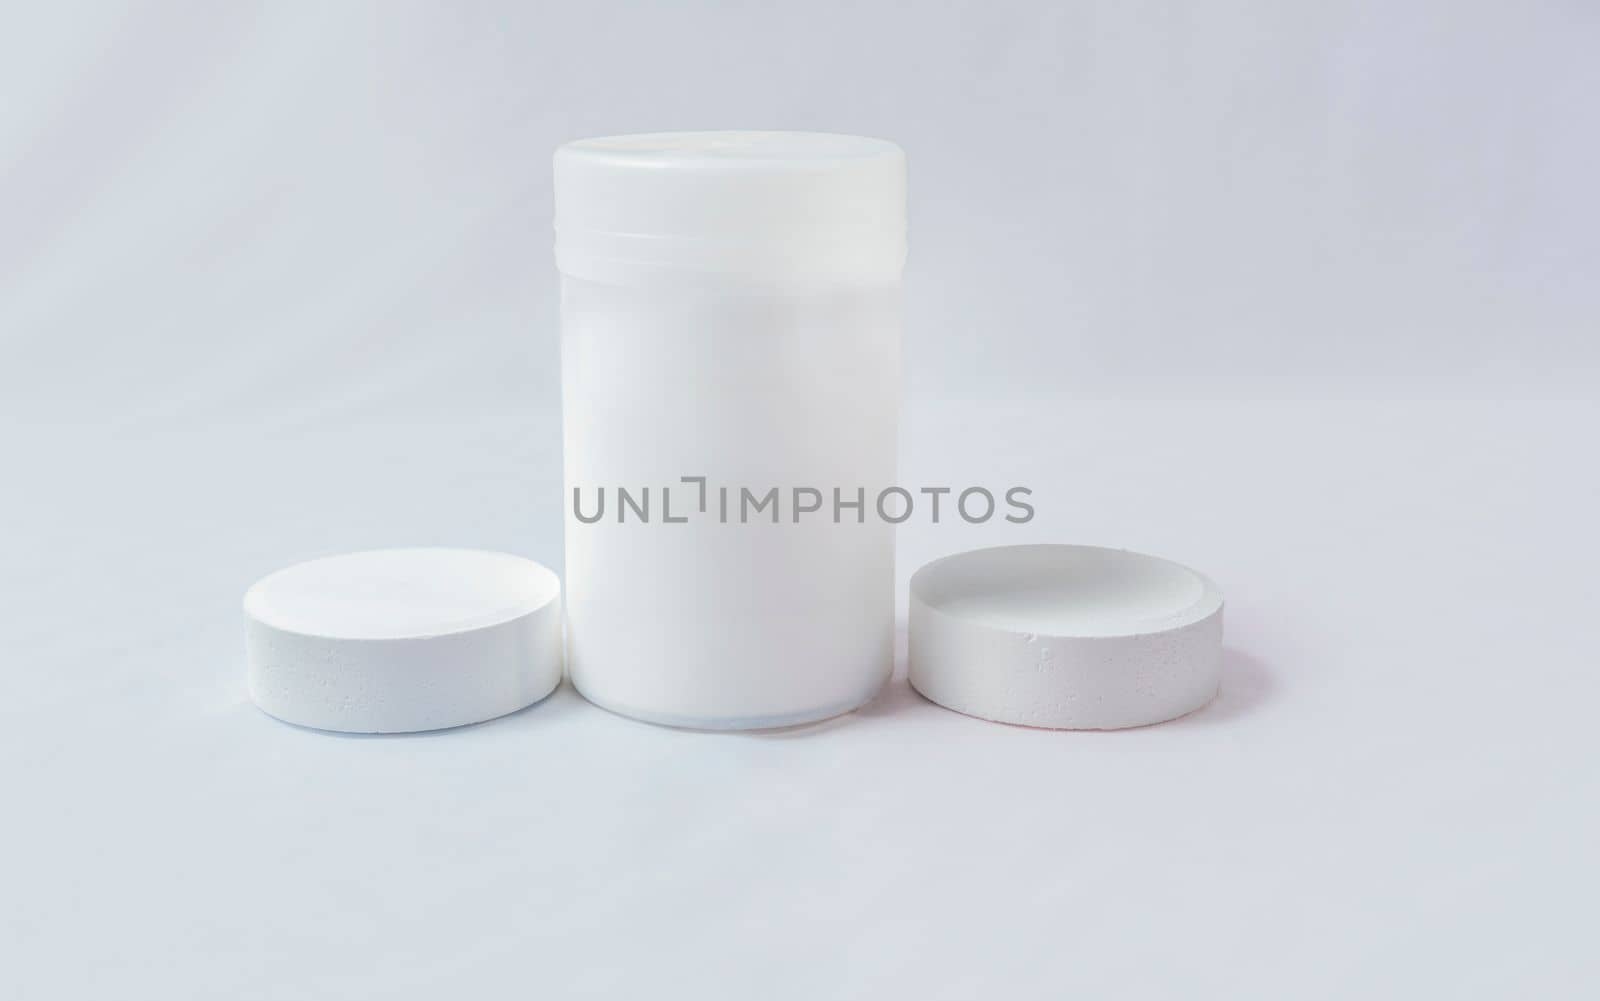 Swimming pool cleaning and maintenance chlorine tablets. Chlorine tablets for pool cleaning on isolated background. Chlorine tablets for swimming pool disinfection on white background by isaiphoto